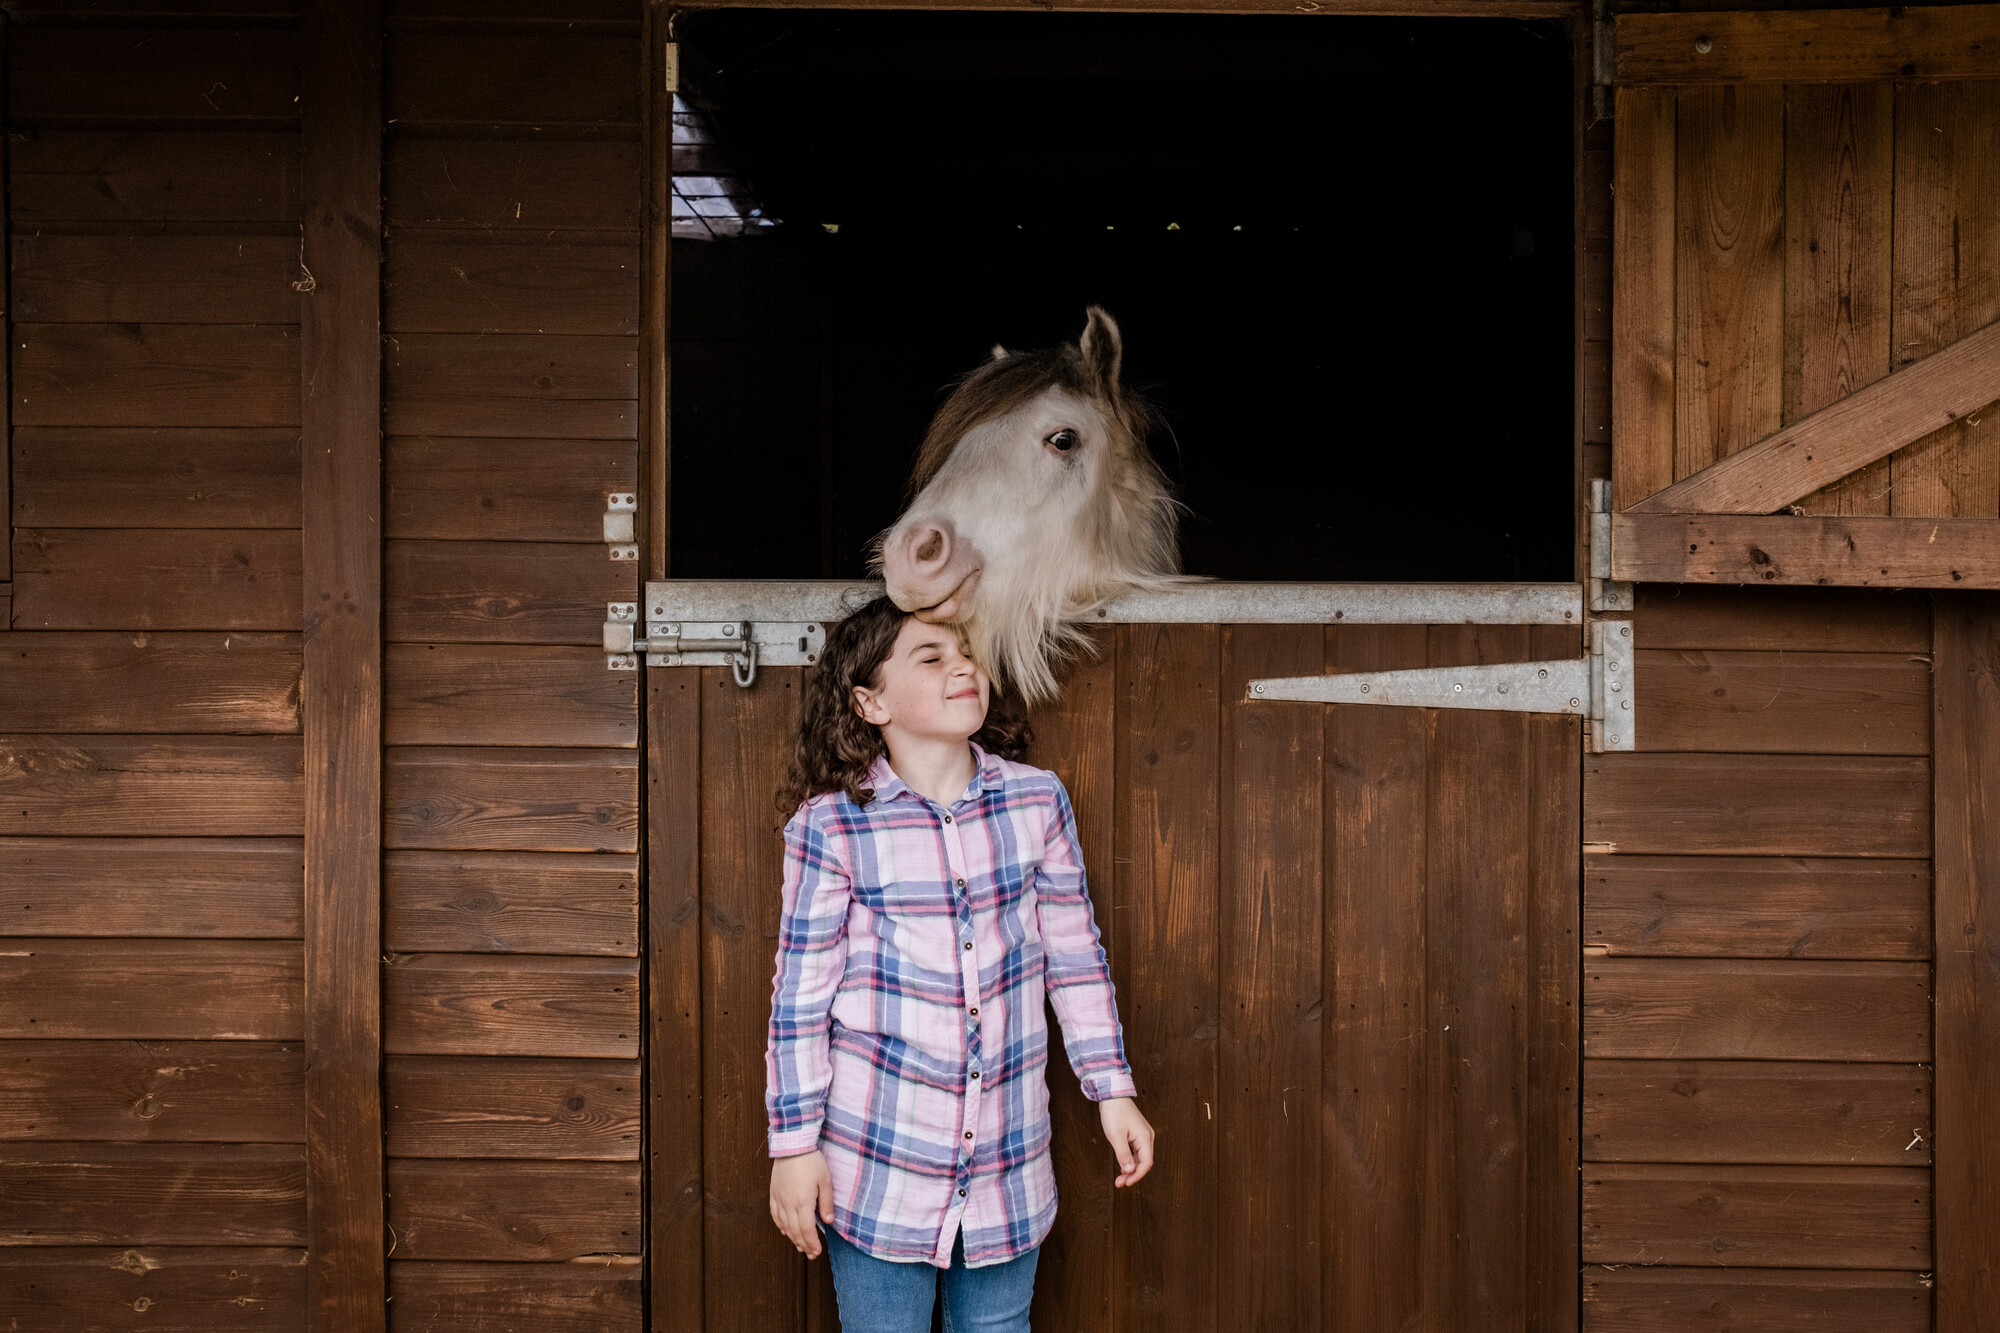 White pony Stan looking over stable door nuzzling Evie's head. Evie is wearing a pink and blue check shirt